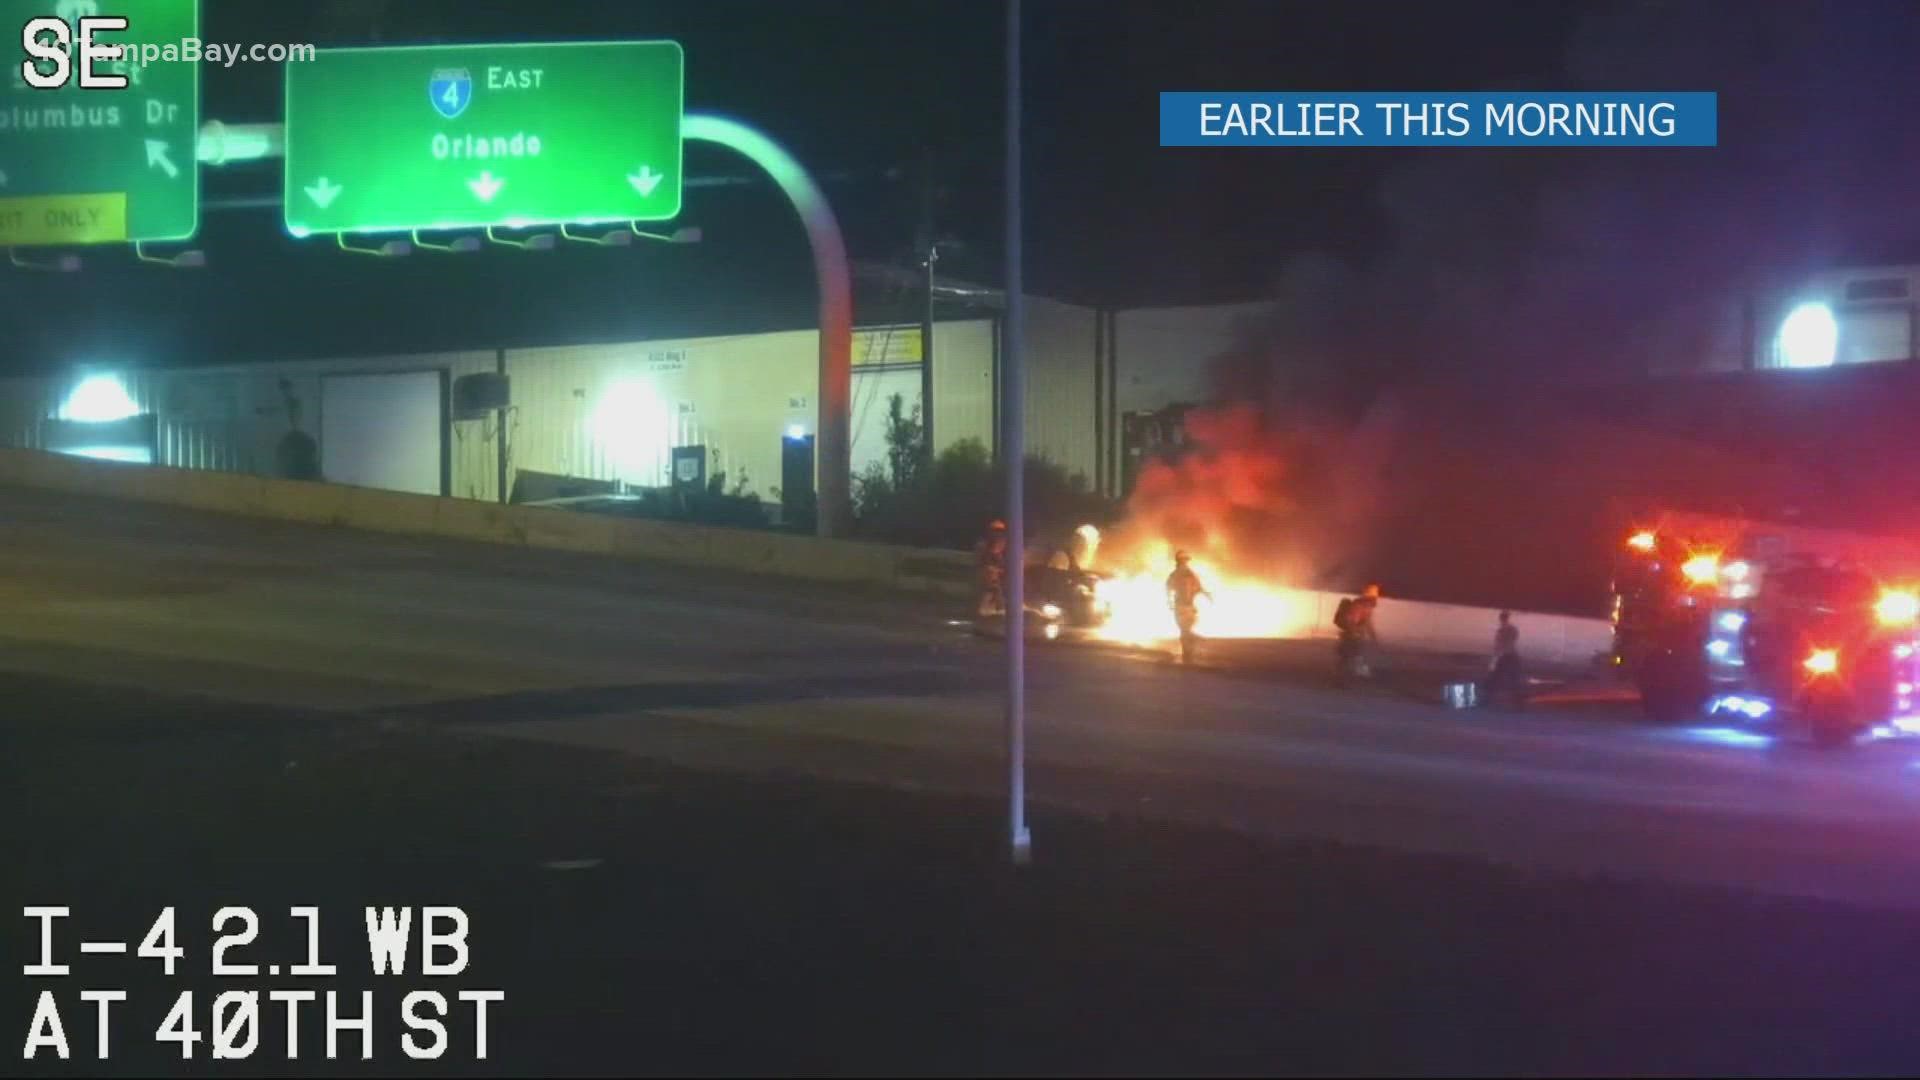 Two people are dead and three people are seriously injured following a fiery two-car crash early Wednesday morning on Interstate 4, according to FHP.